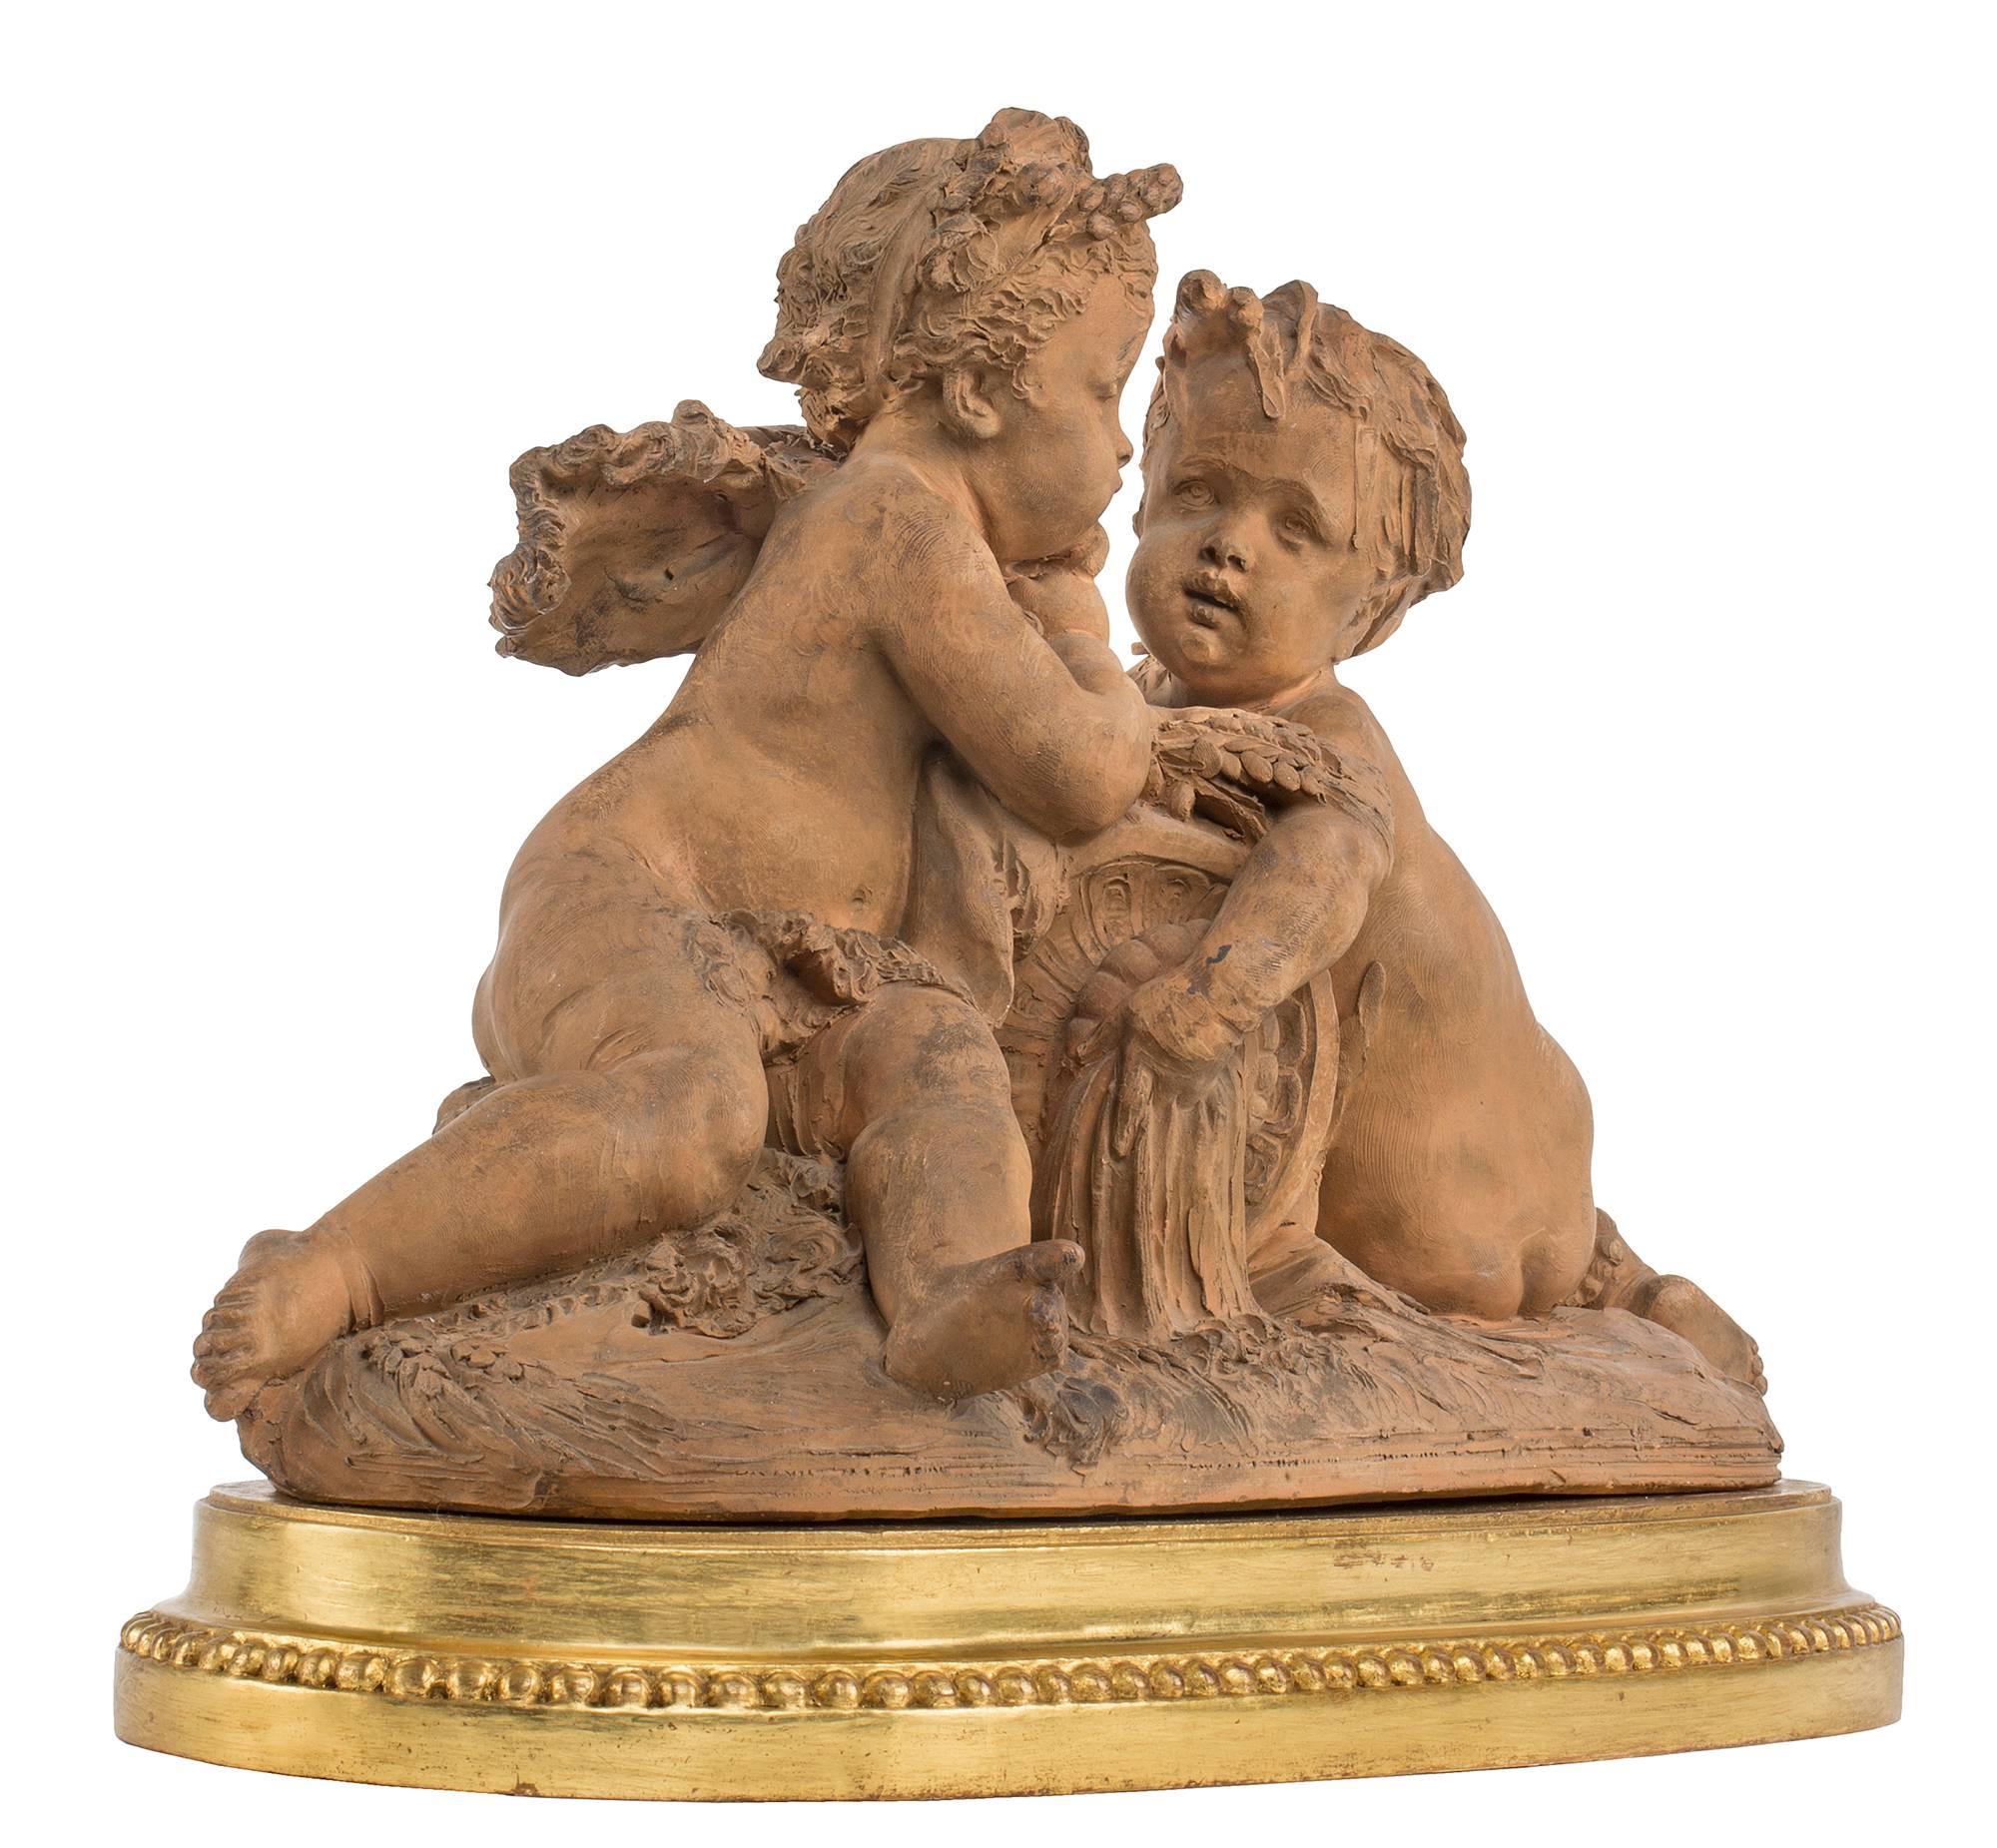 A high quality French 19th century Louis XVI style terra cotta grouping of putti signed A. Carrier 1864. The charming statuary is raised by an oblong giltwood base following the contour, displaying a stepped design with a fine beaded band. The terra